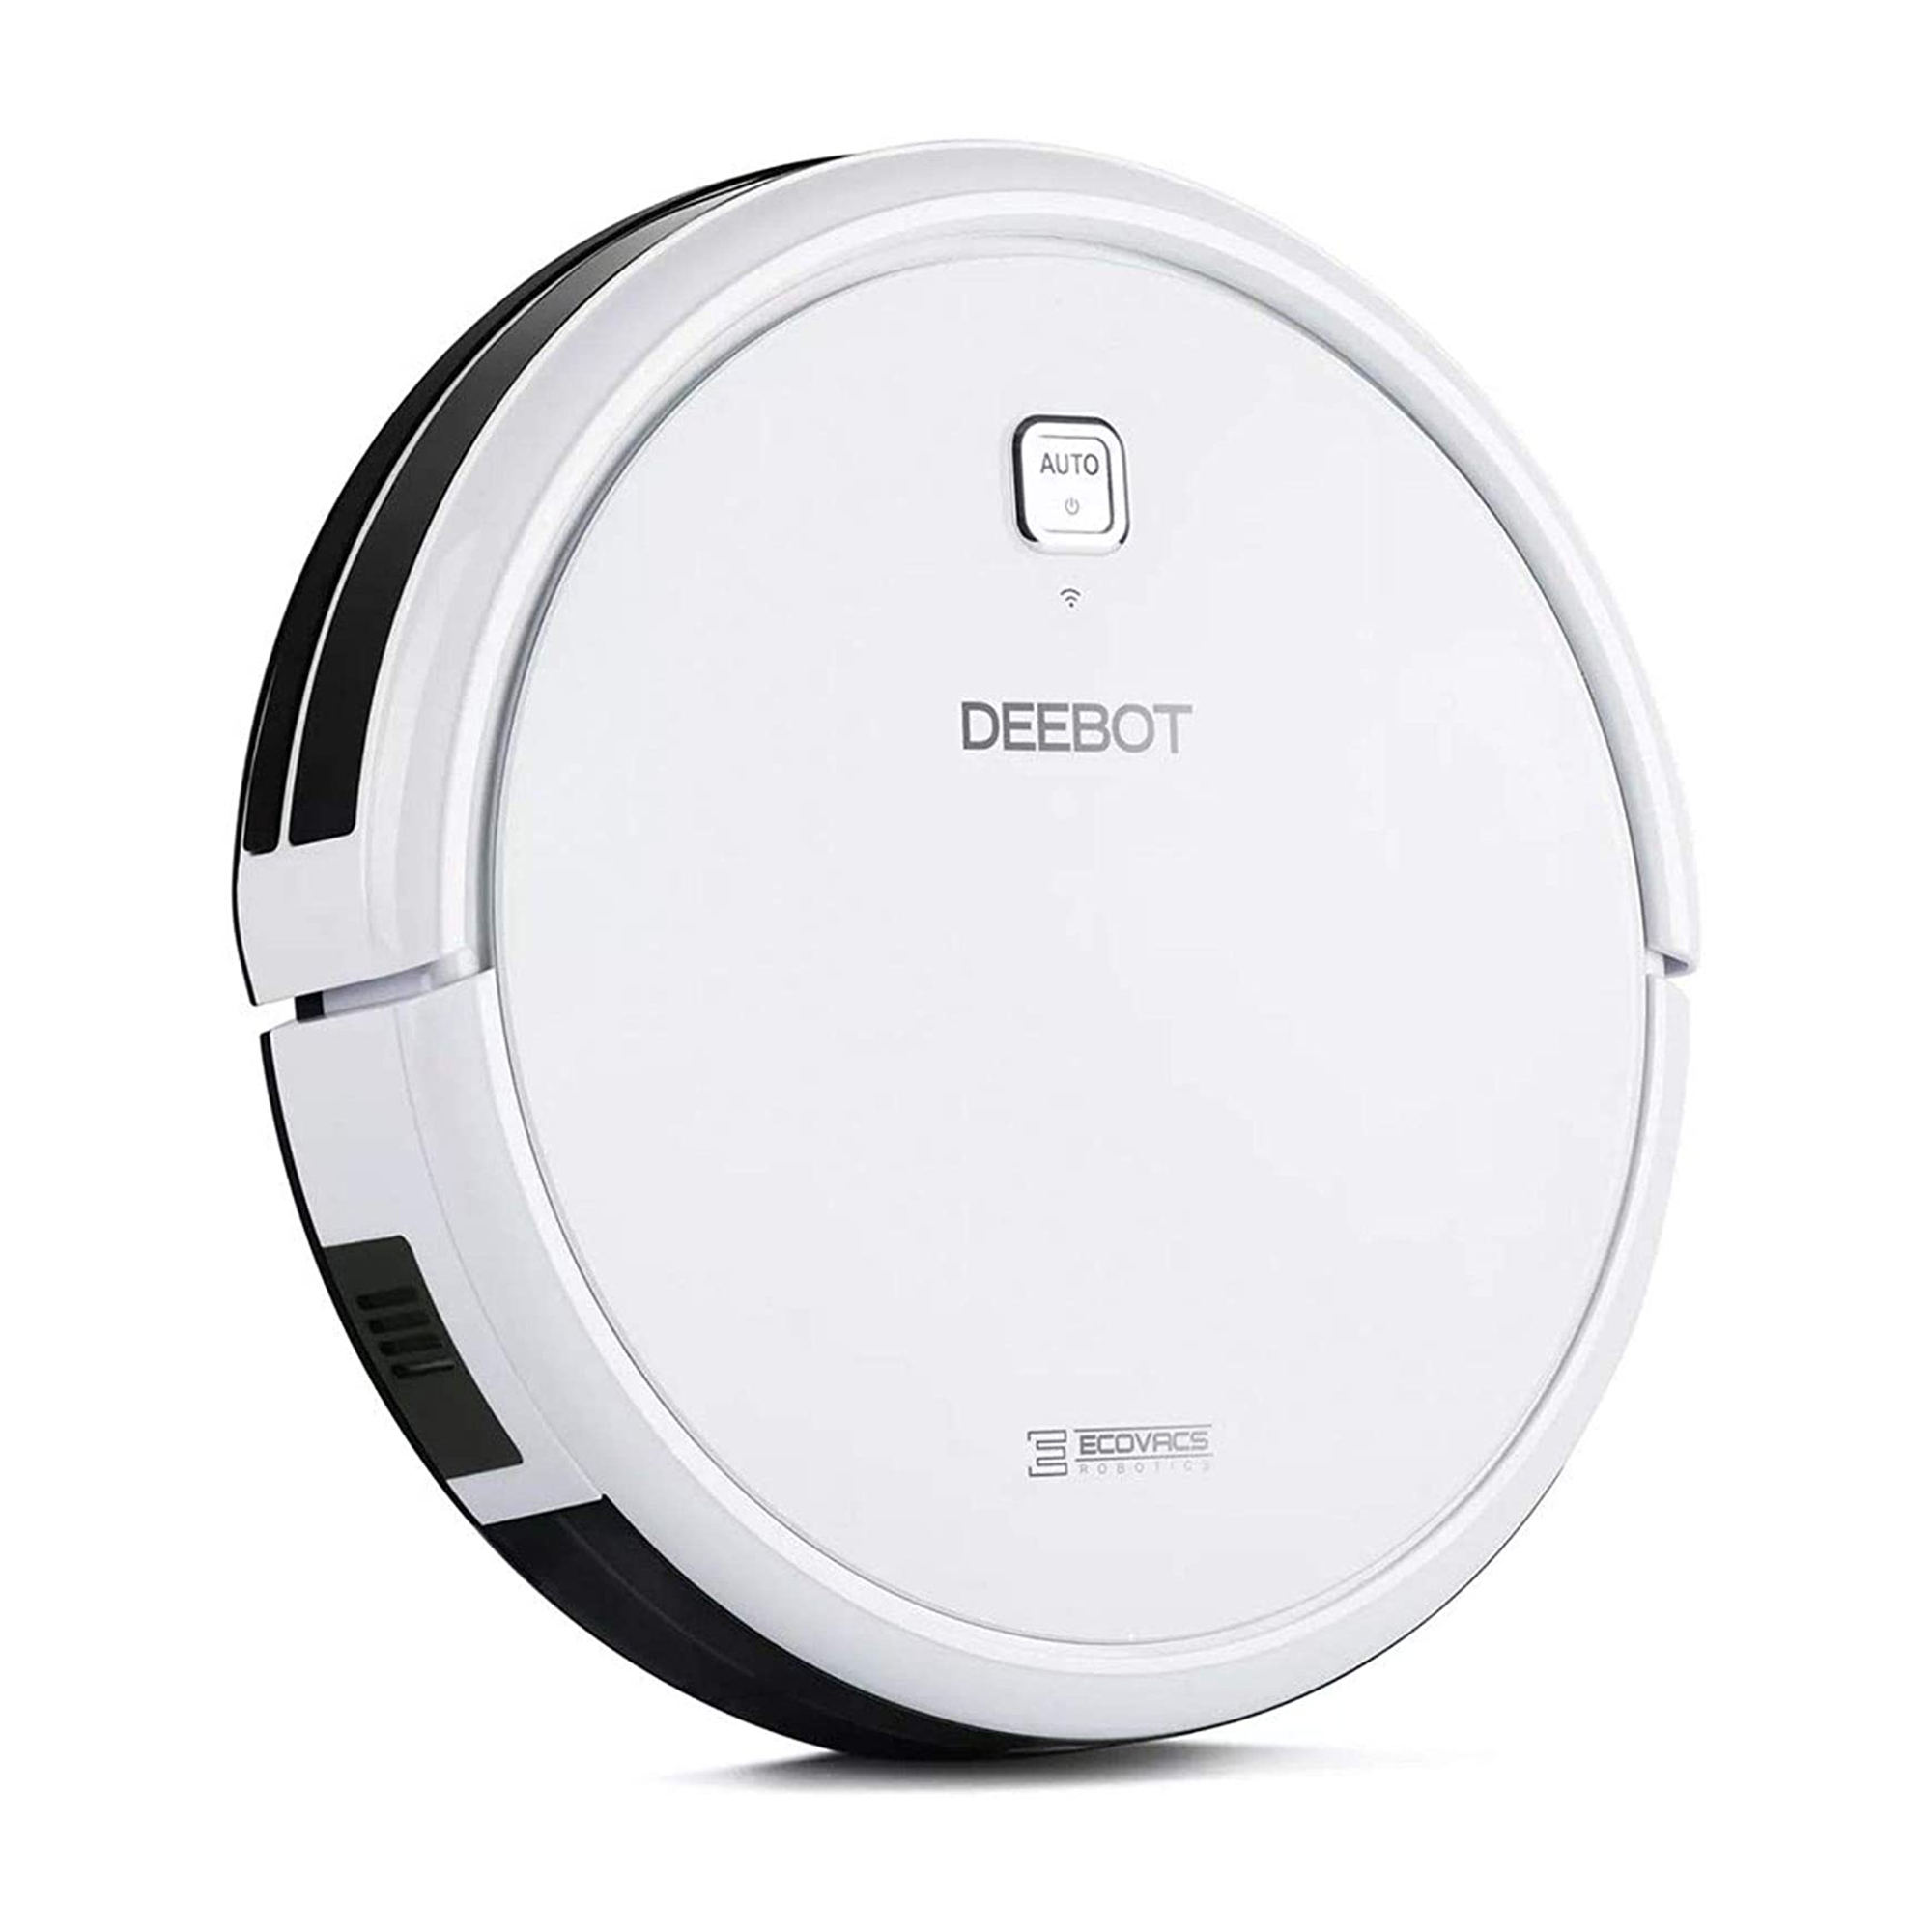 Ecovacs Deebot N79W Remote Control Home Robot Multi Surface Vacuum Cleaner - image 1 of 8